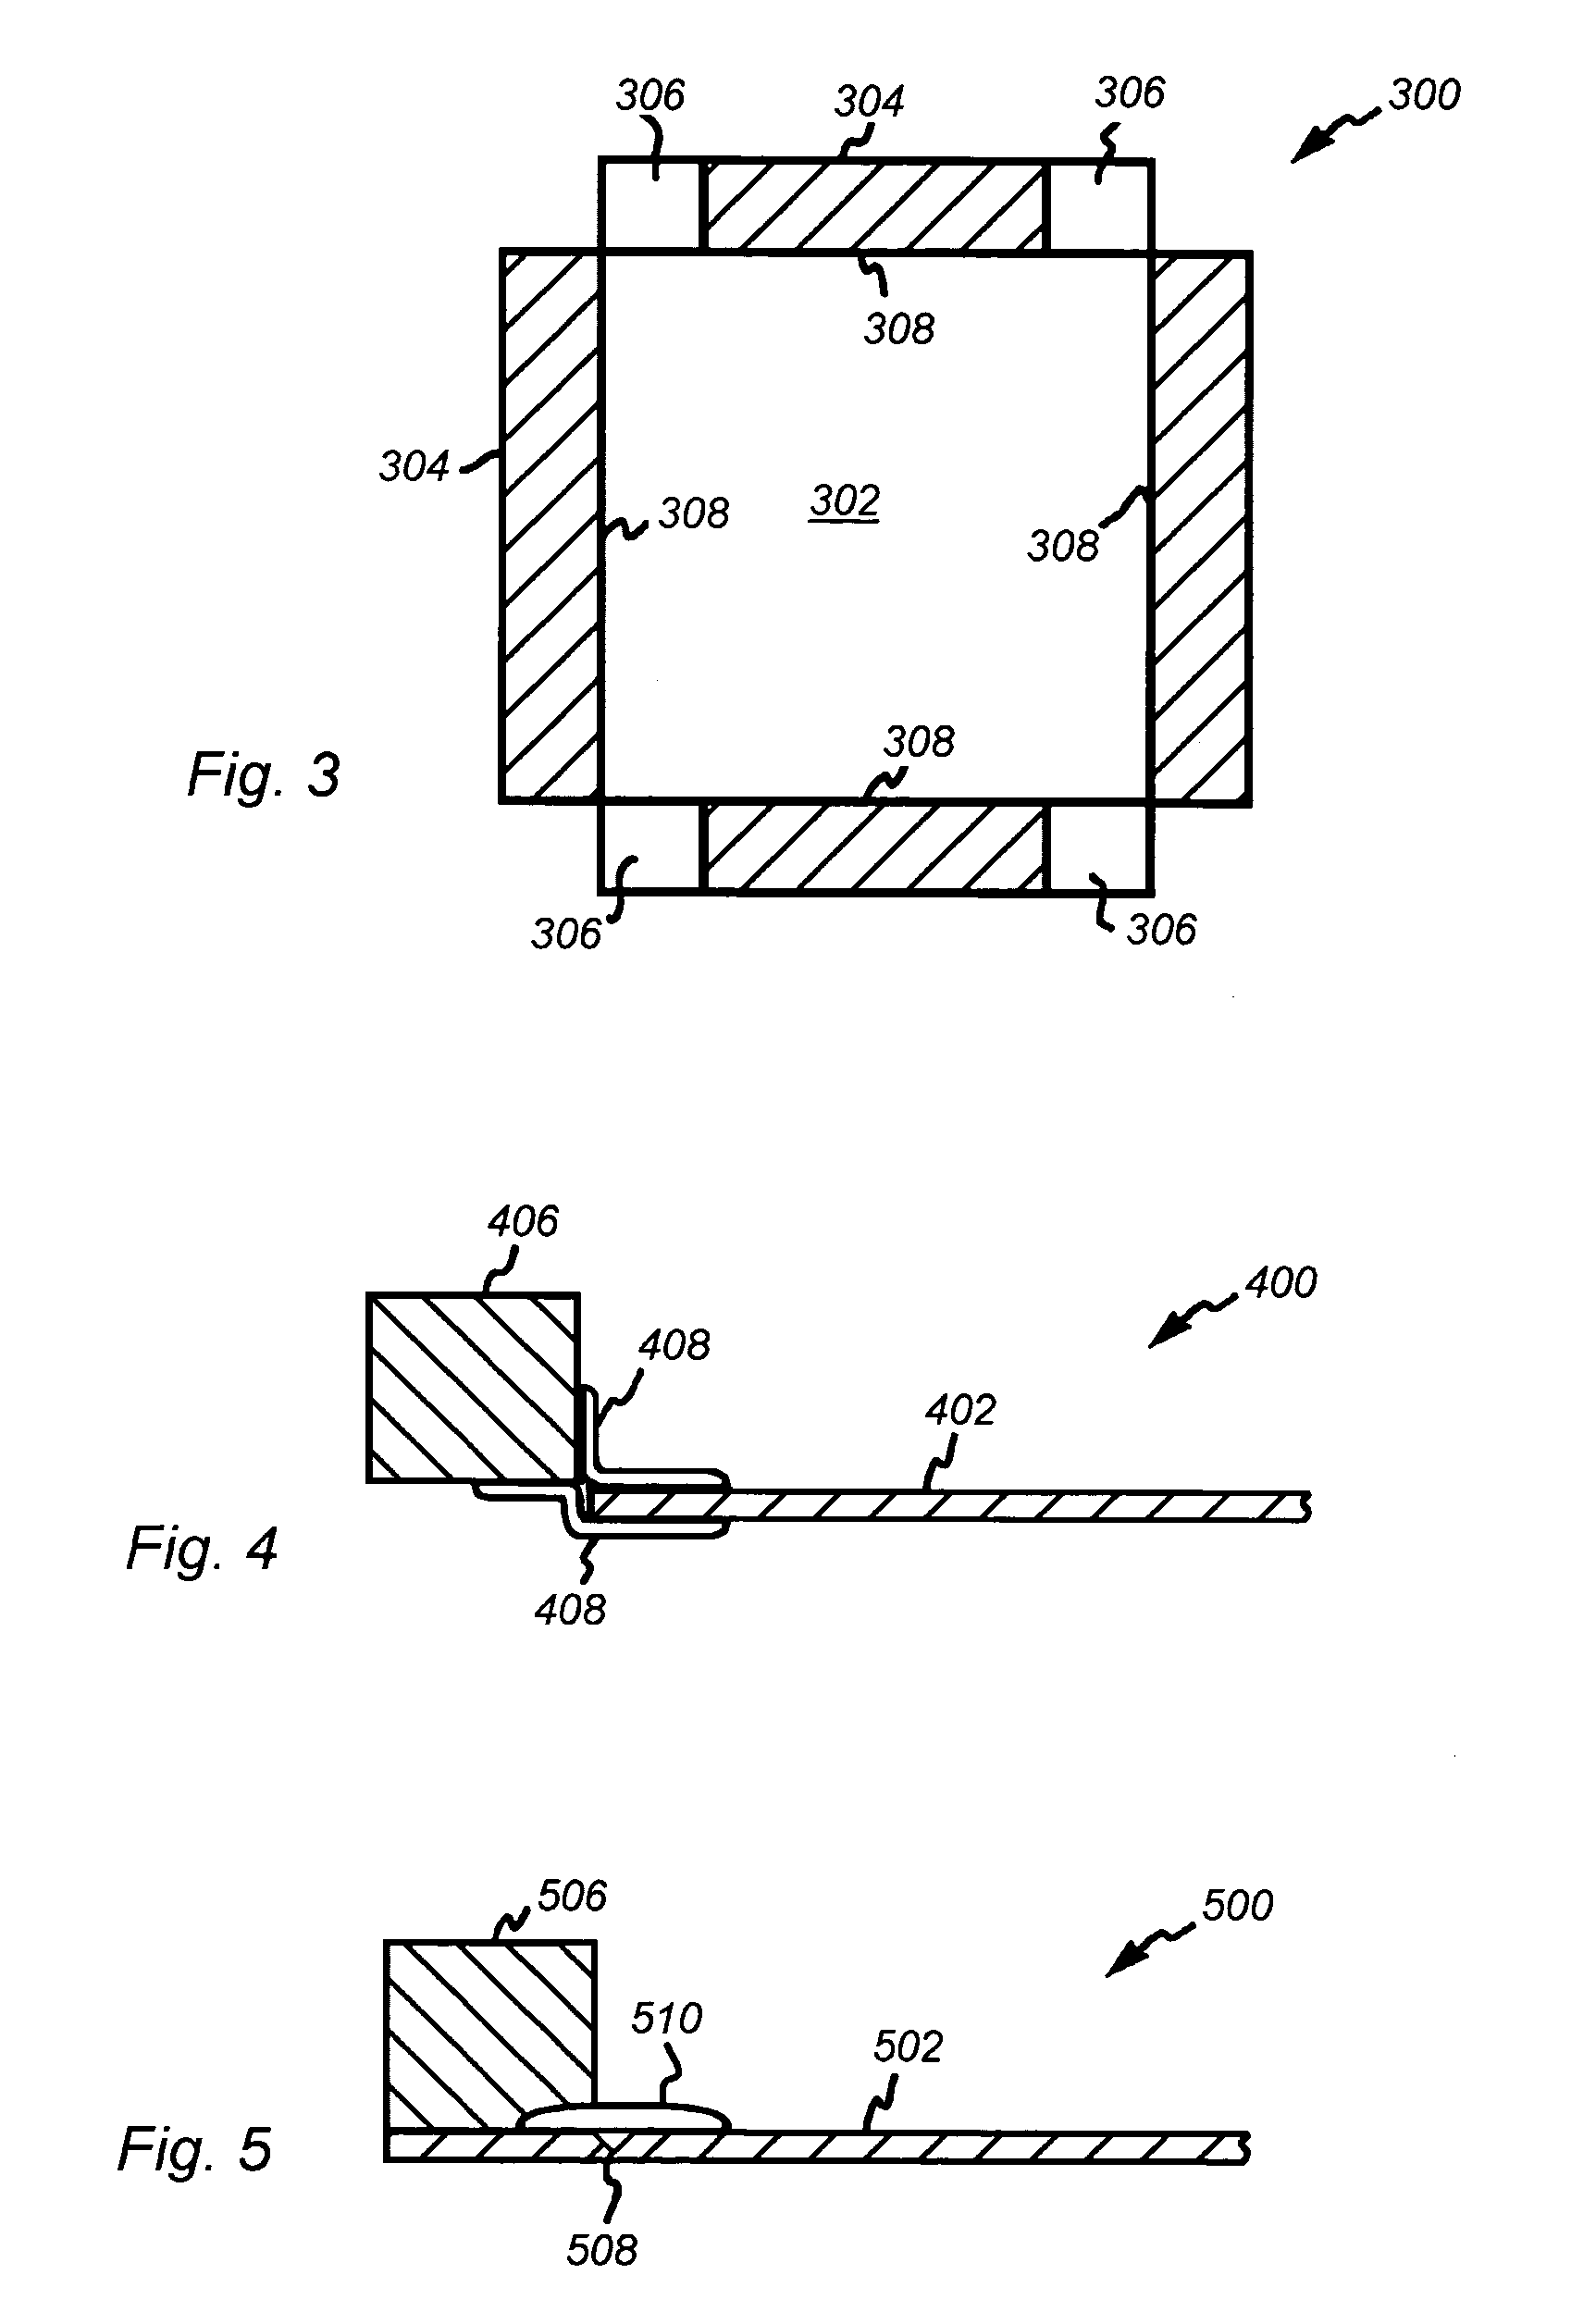 Hinged foam assembly for mattress manufacturing